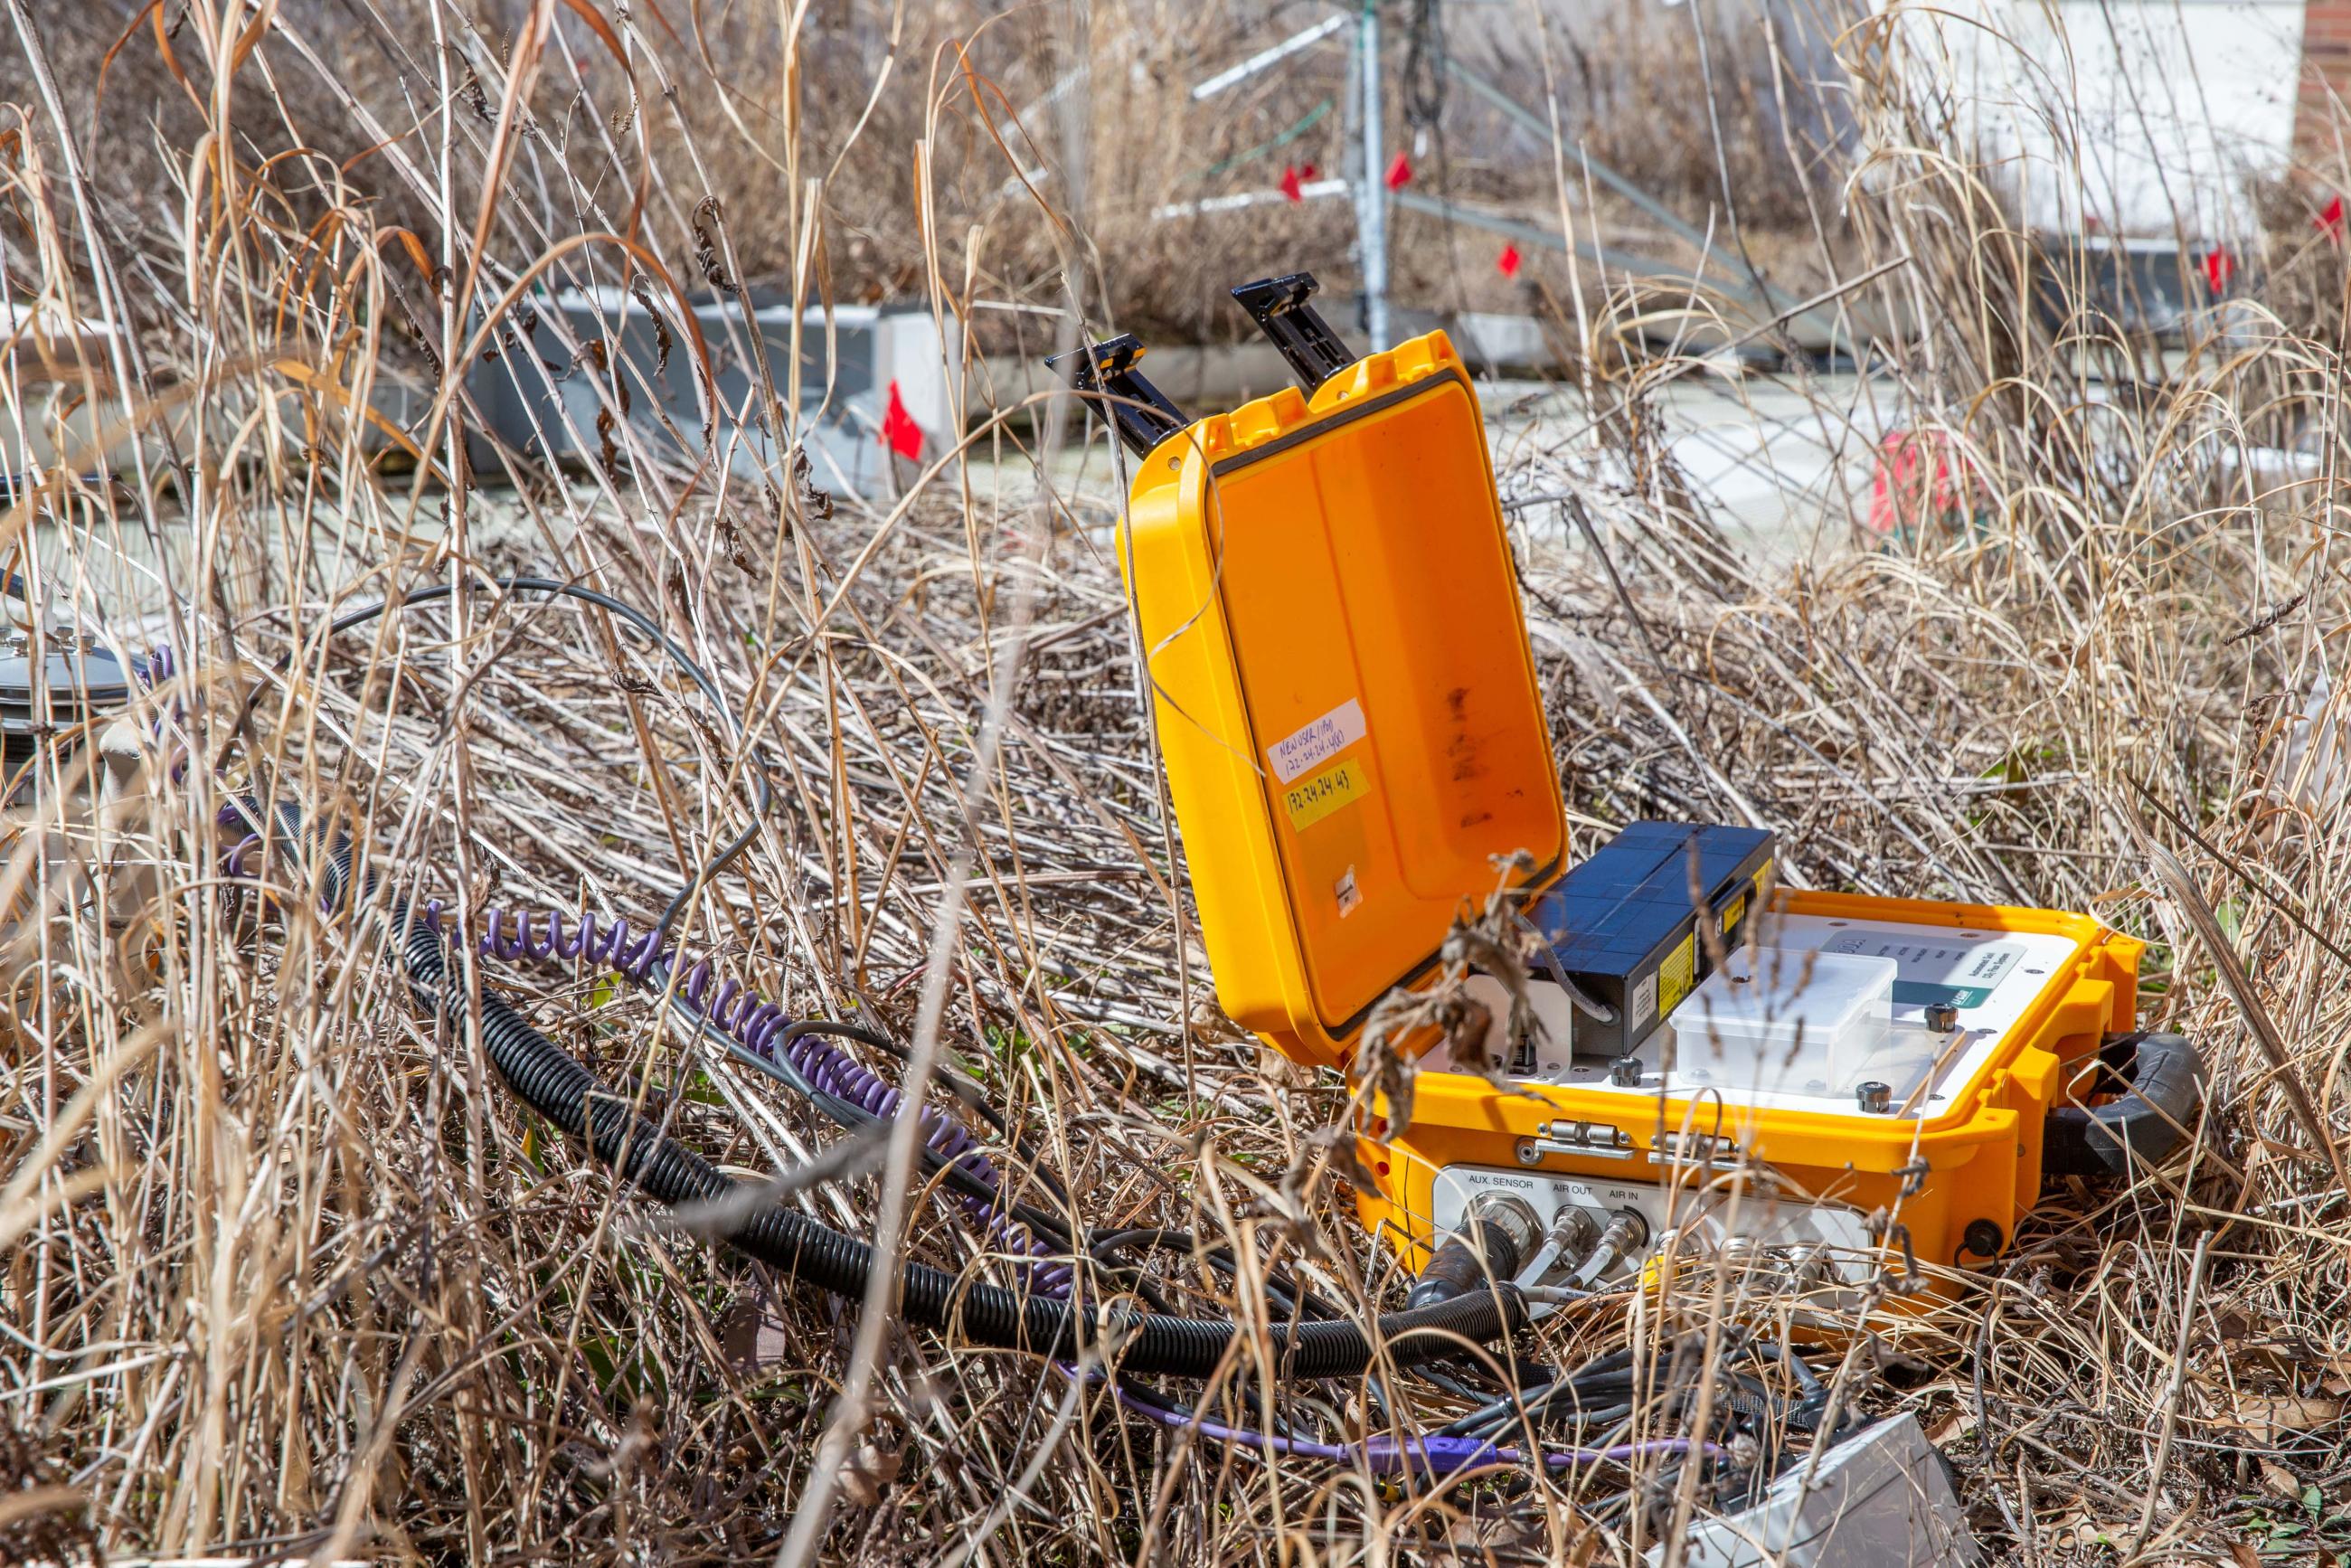 A yellow hard case sits in one of the Schoonover green roof beds with instruments inside and hoses and cables connected to sensors in the soil.